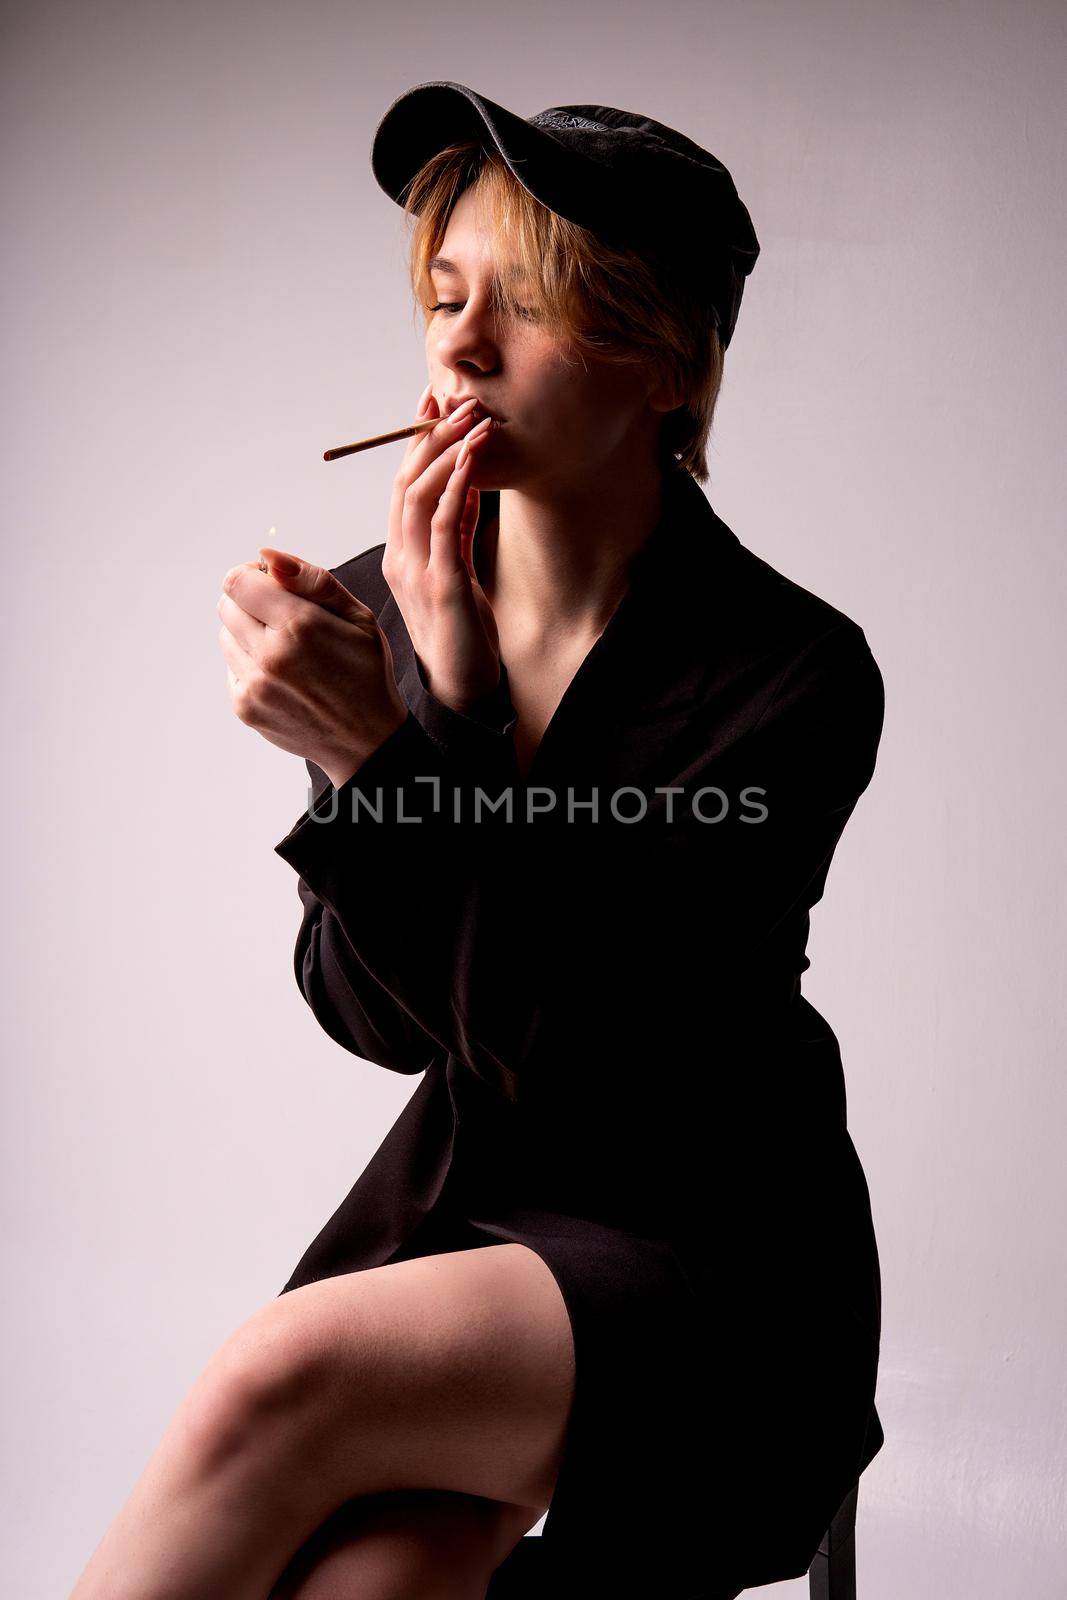 A girl lights a cigarette in a cap in a black suit on a white background girl cigarette smoke art cap, for design face for smoker and icon people, avatar habit. 20 issue human,